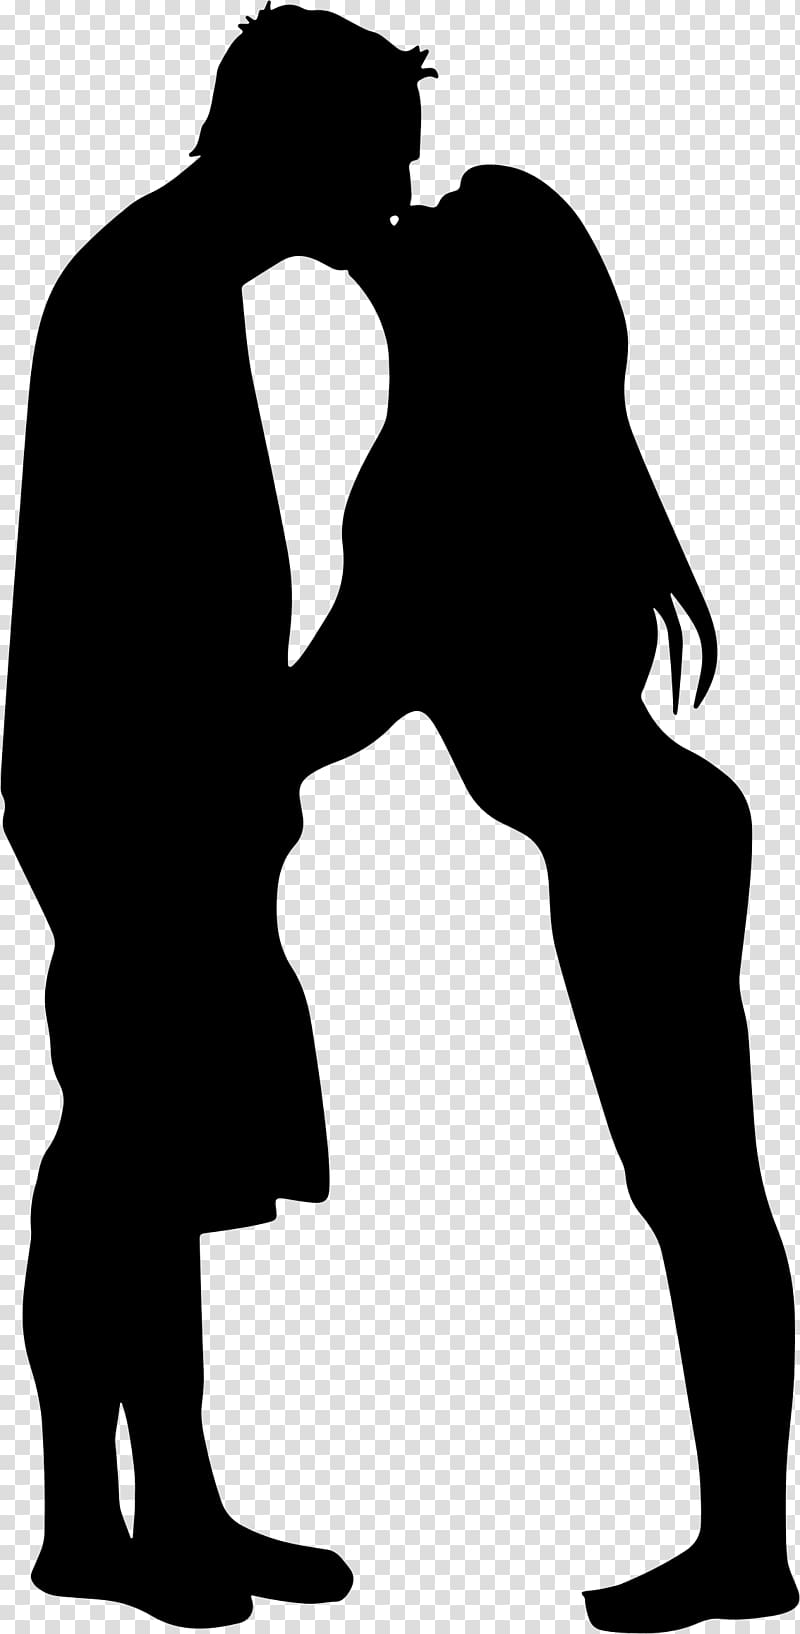 Kiss Silhouette Intimate relationship, couple transparent.